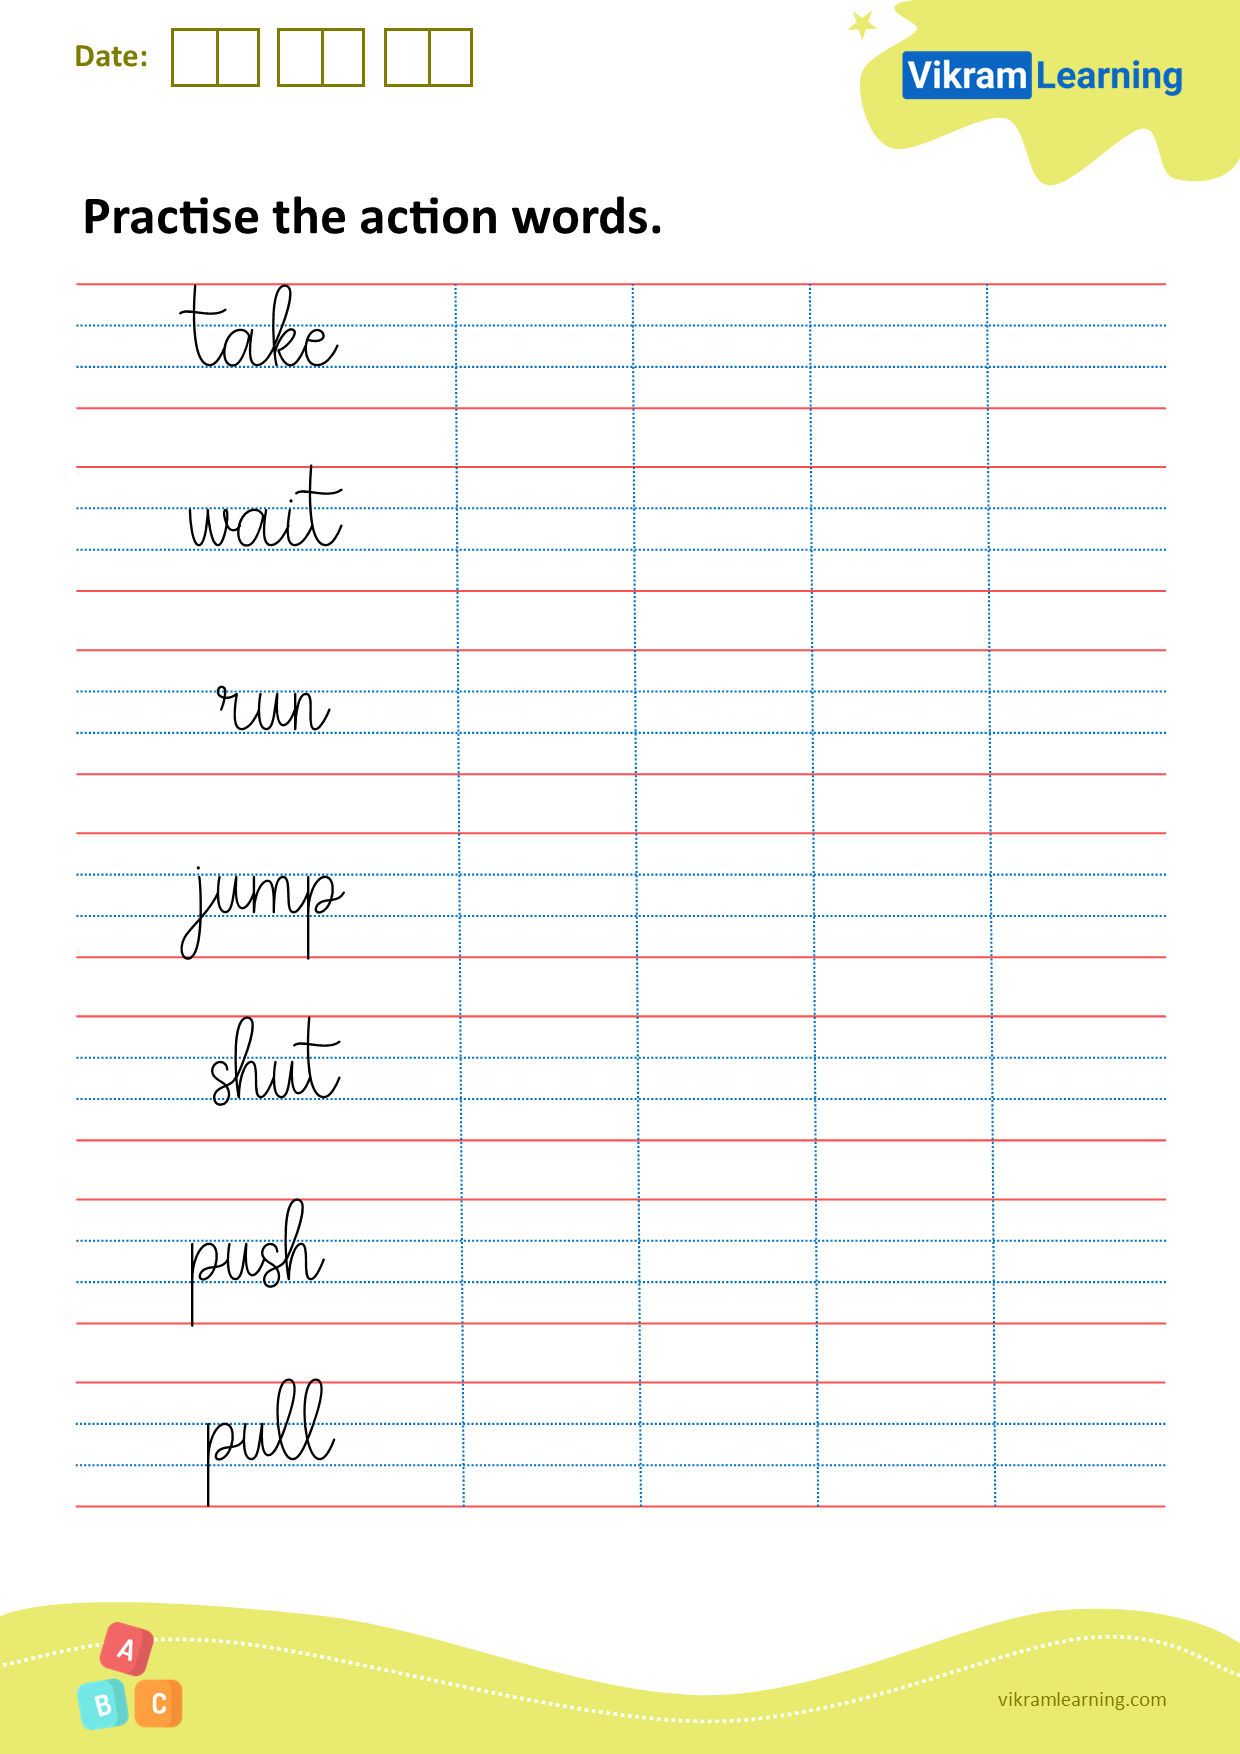 download-practice-the-action-words-worksheets-vikramlearning